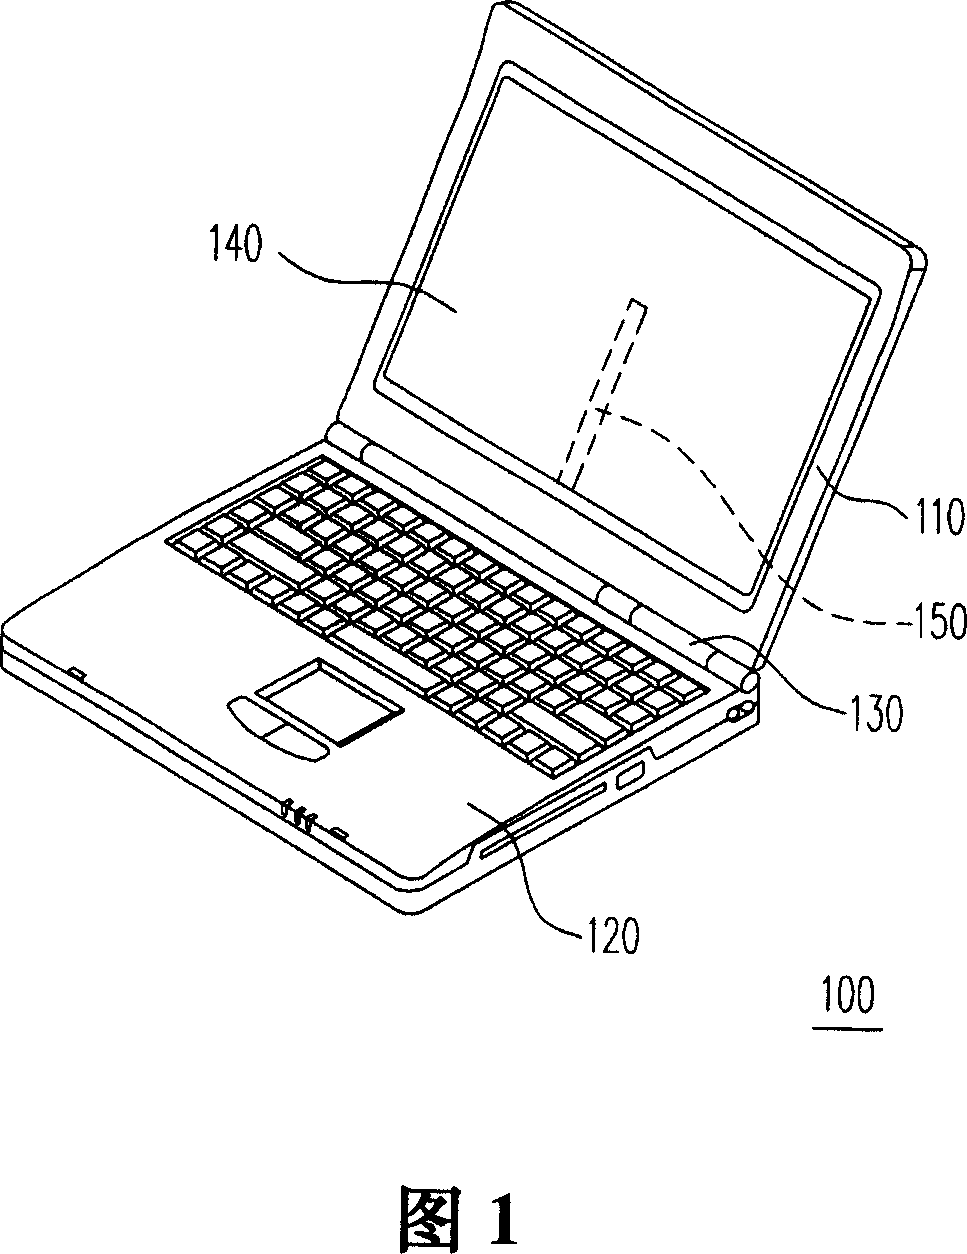 Folded electronic device with alarm sound and display device